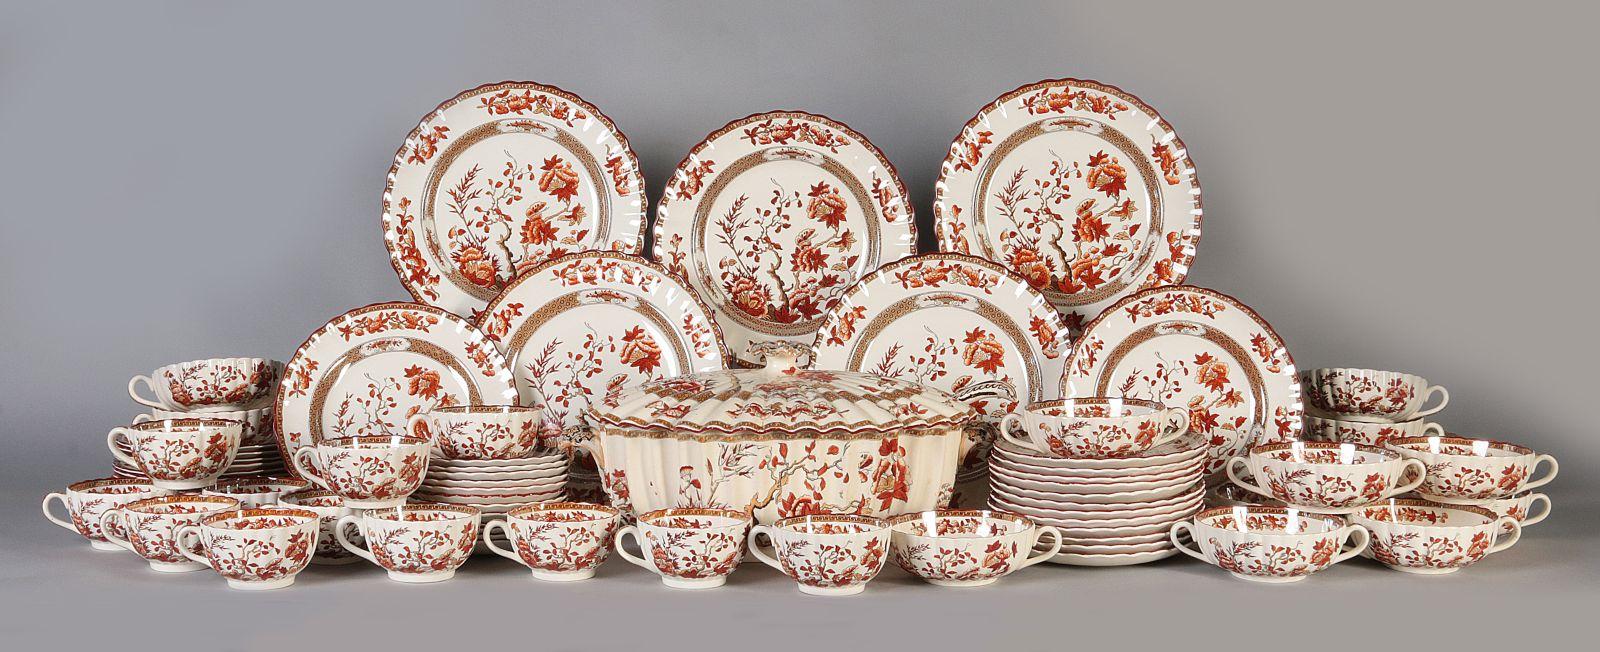 A COPELAND SPODE 'INDIAN TREE' DINNER SERVICE